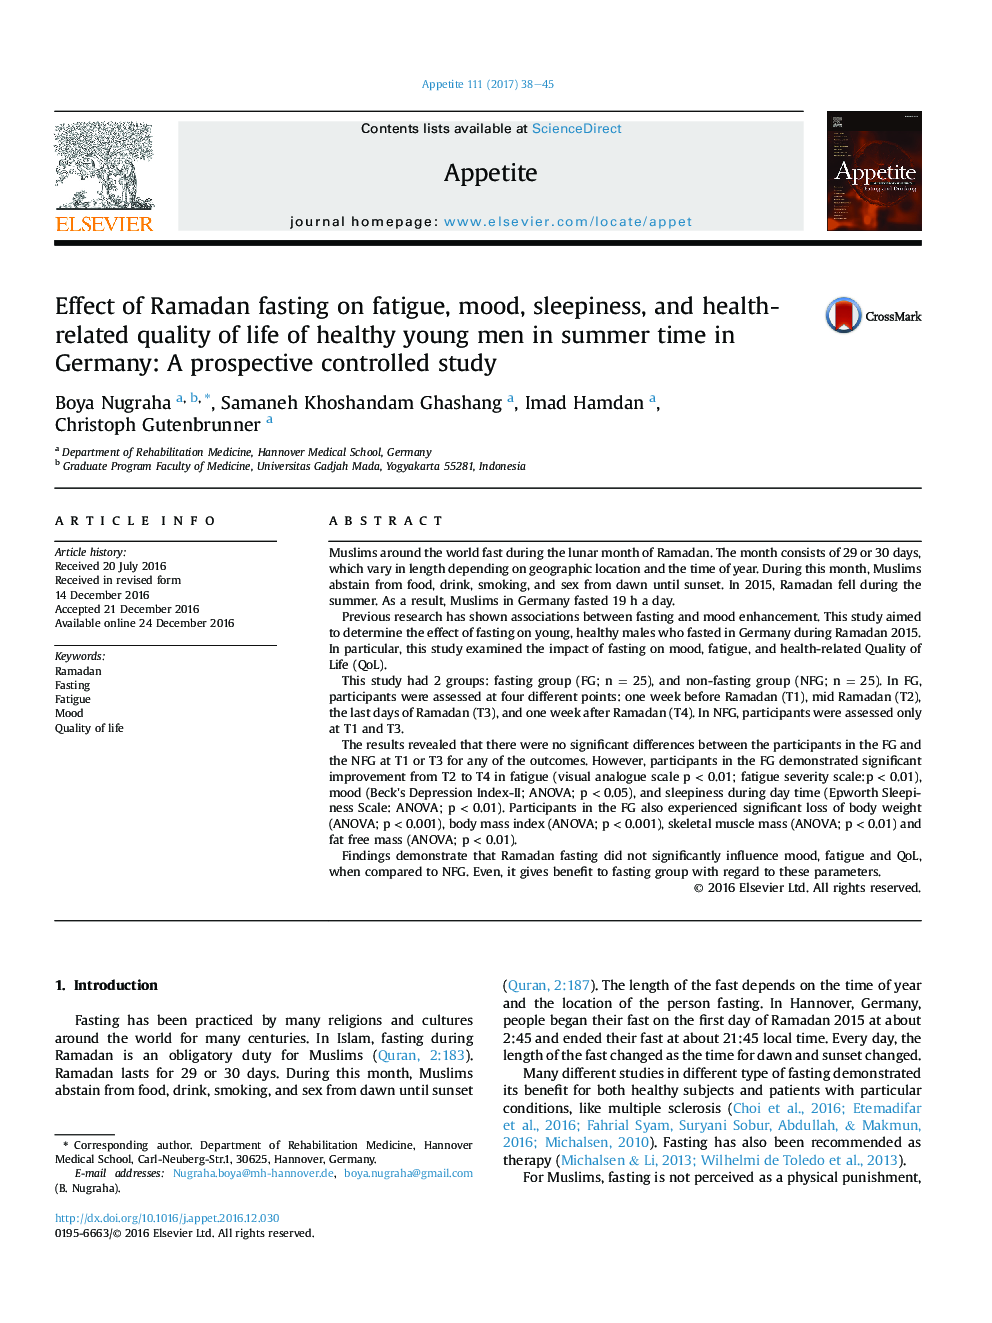 Effect of Ramadan fasting on fatigue, mood, sleepiness, and health-related quality of life of healthy young men in summer time in Germany: A prospective controlled study